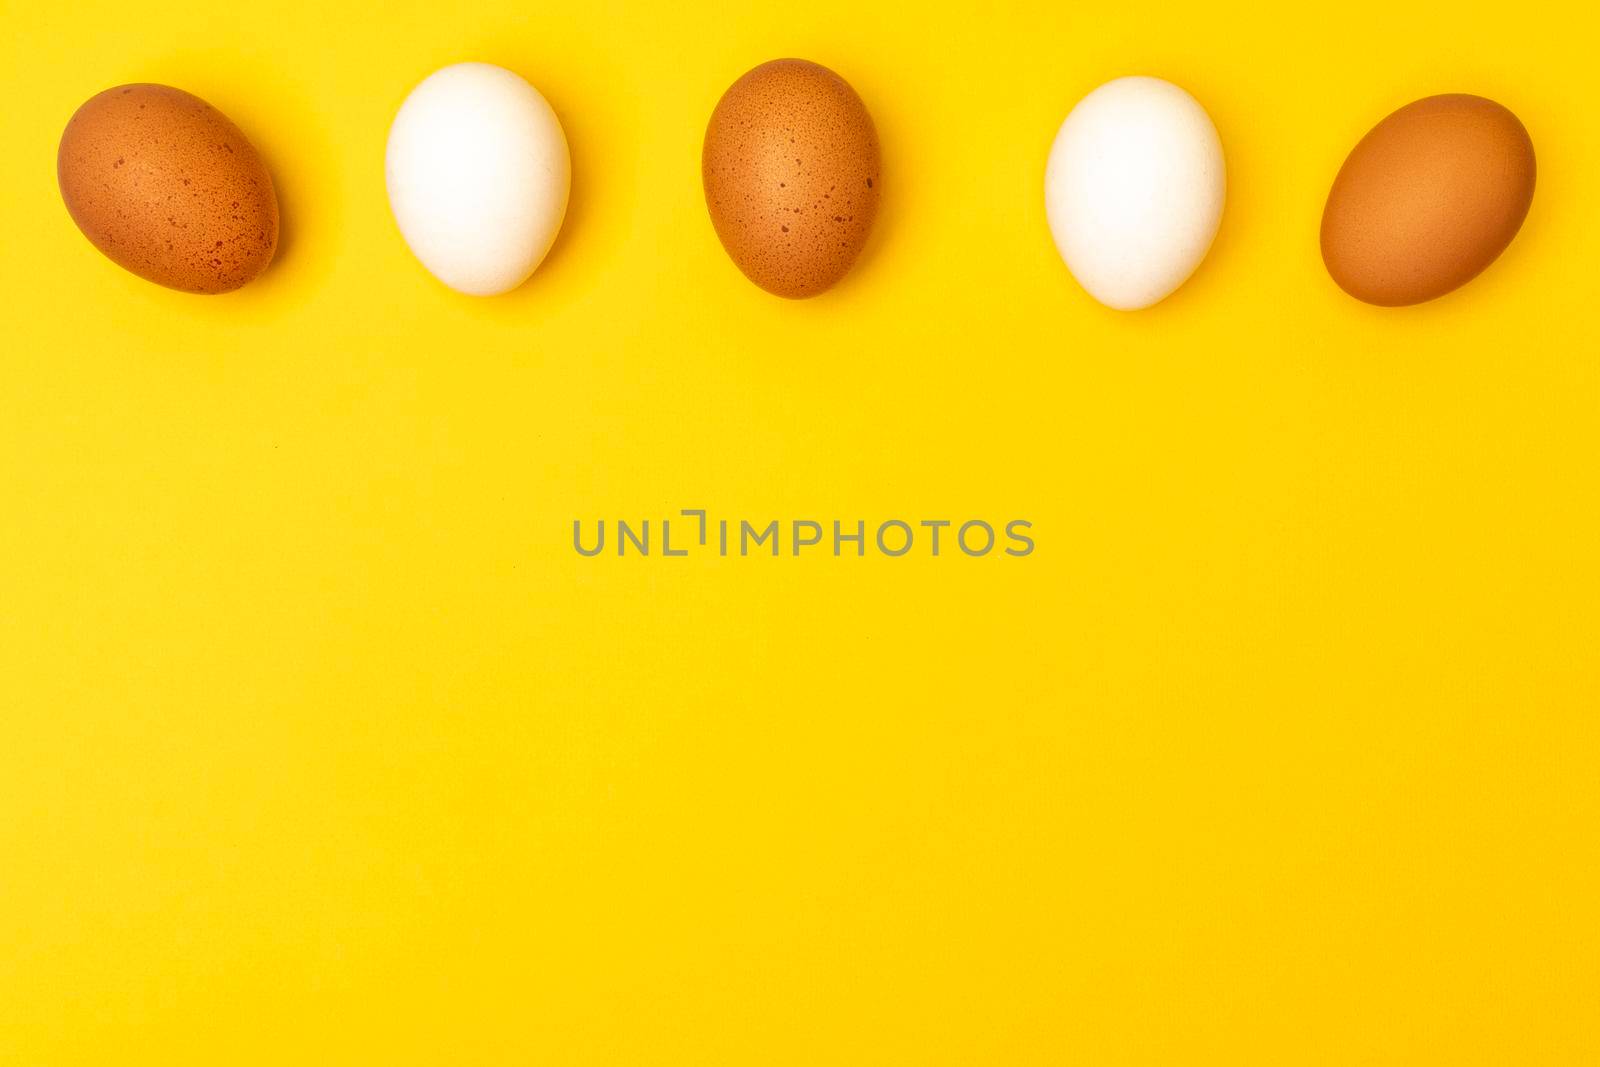 Easter eggs on a yellow background, place for an inscription in the center.